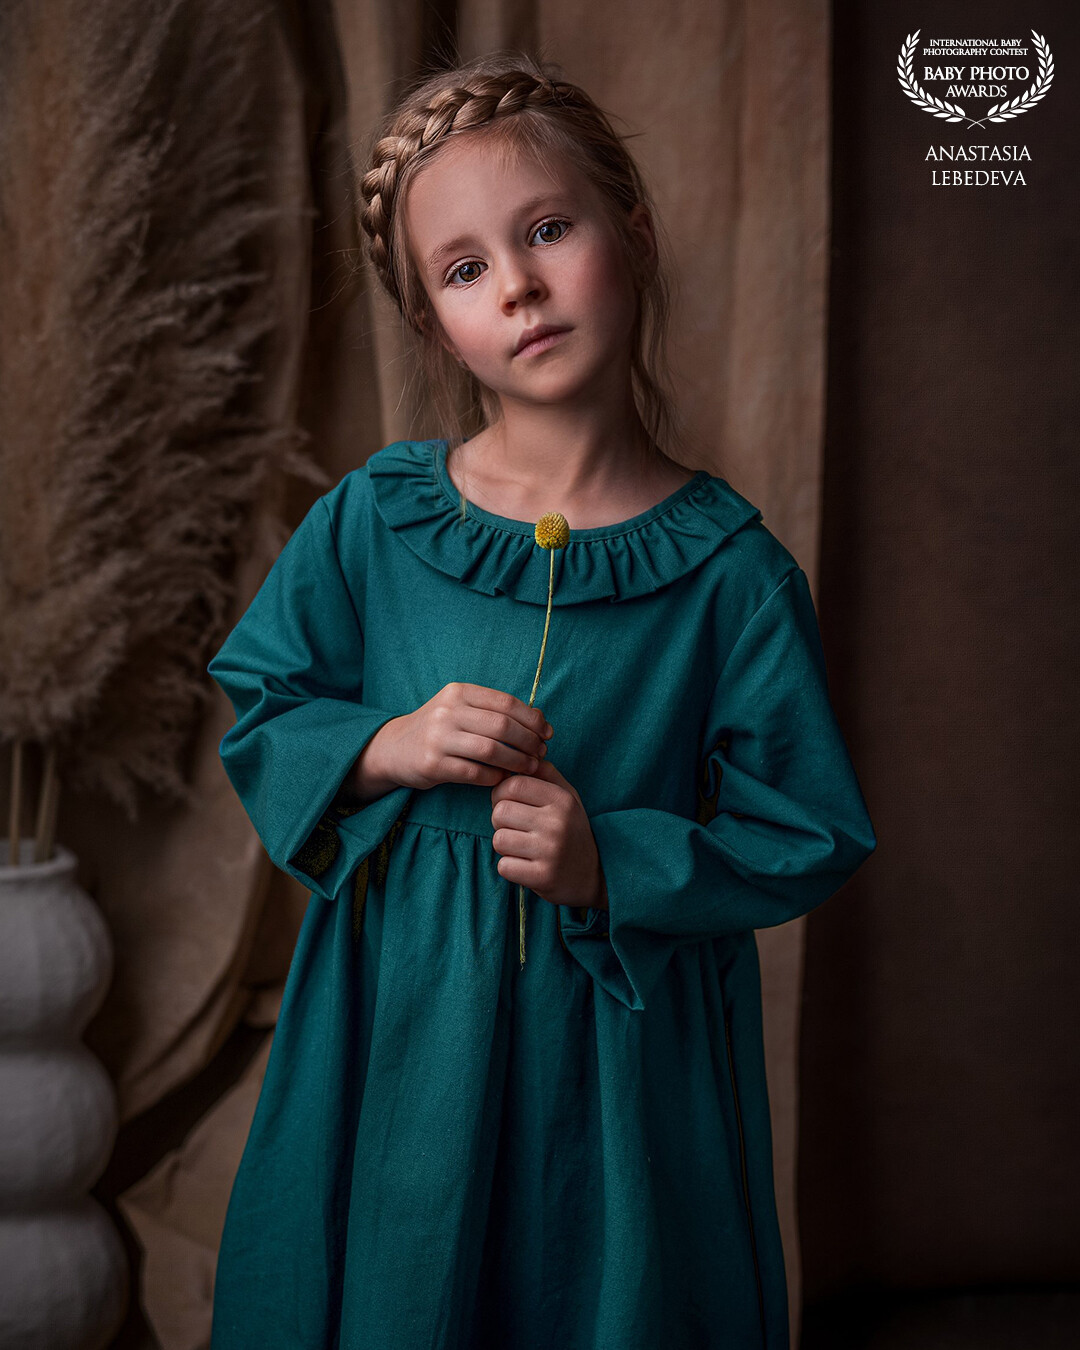 A charming photo shoot for Darina to capture unforgettable moments of her childhood in beautiful and exciting photographs. The bright colors of the dress and the girl’s sophisticated face delighted her parents.